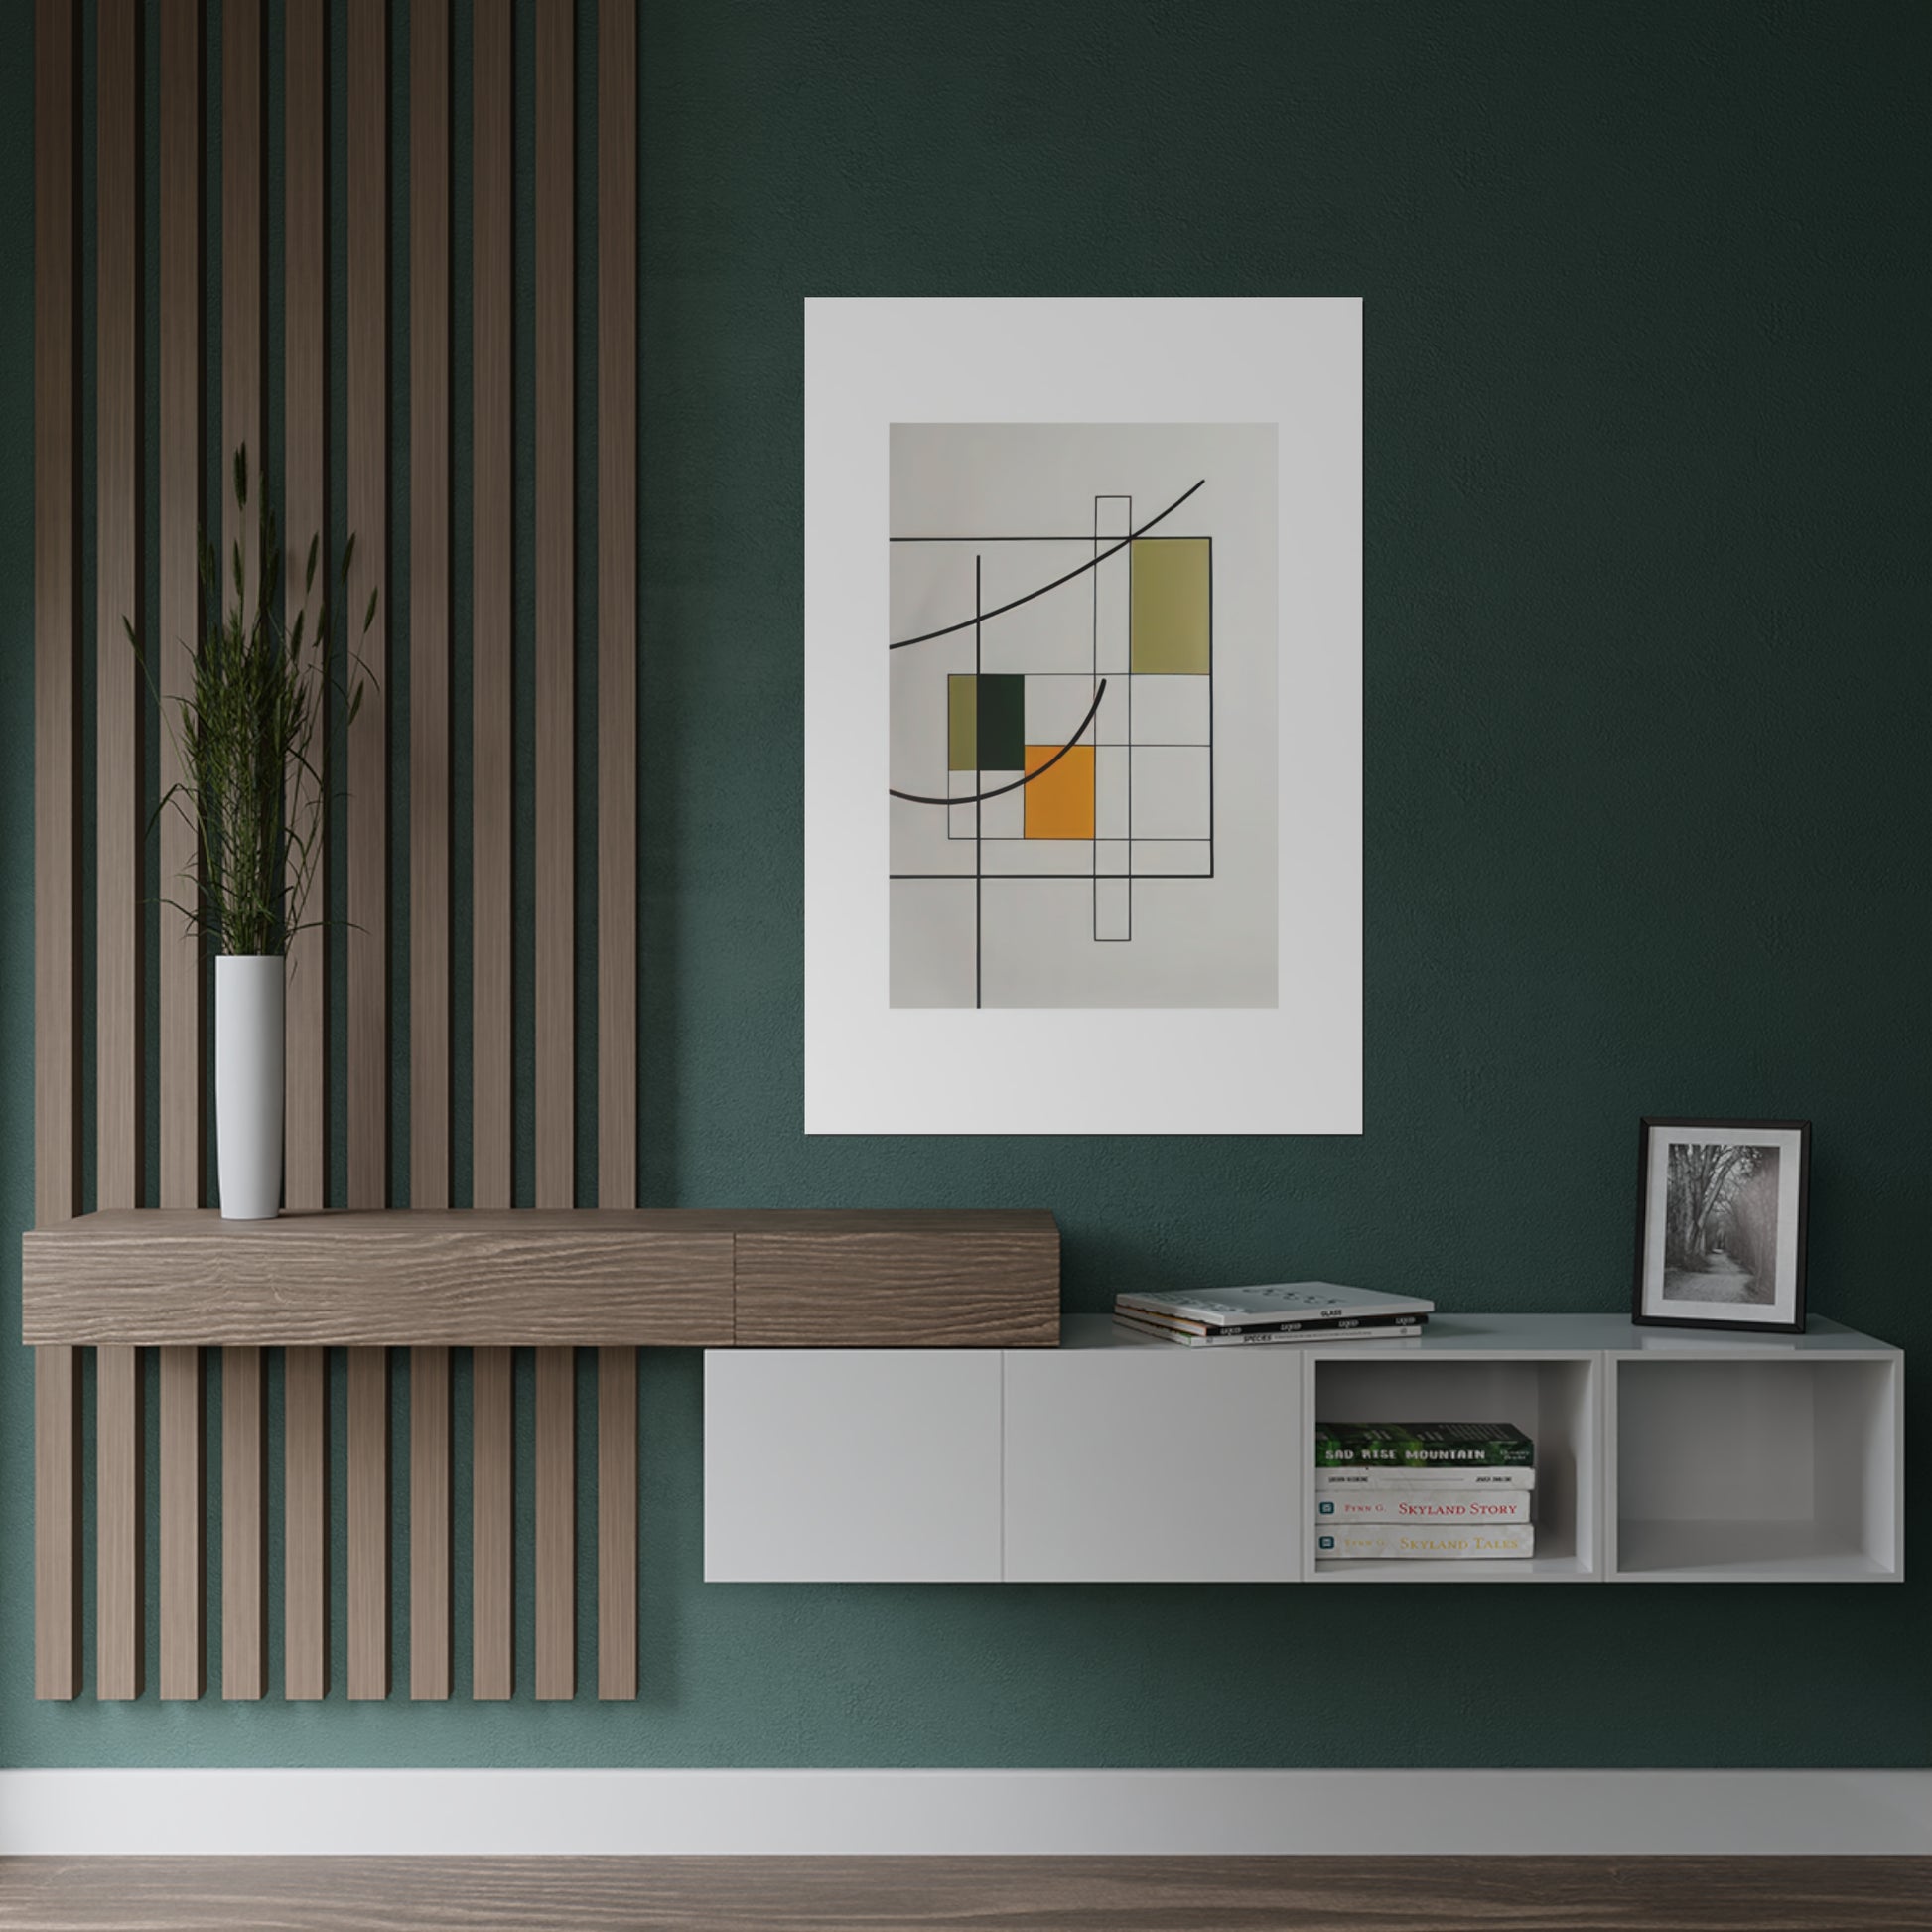 Essence of Form (2/3) Sunlit Simplicity - Satin Poster artfully marries minimalist Bauhaus design with classic composition. Using a blend of green, yellow, and amber, the abstract geometric arrangement is both engaging and tranquil. The light backdrop emphasizes the vibrant curves and grids, striking a balance between abstract allure and structured design. More than mere decor, this artwork celebrates the fusion of design and function, inviting viewers into a vivid exploration of imagination and form.